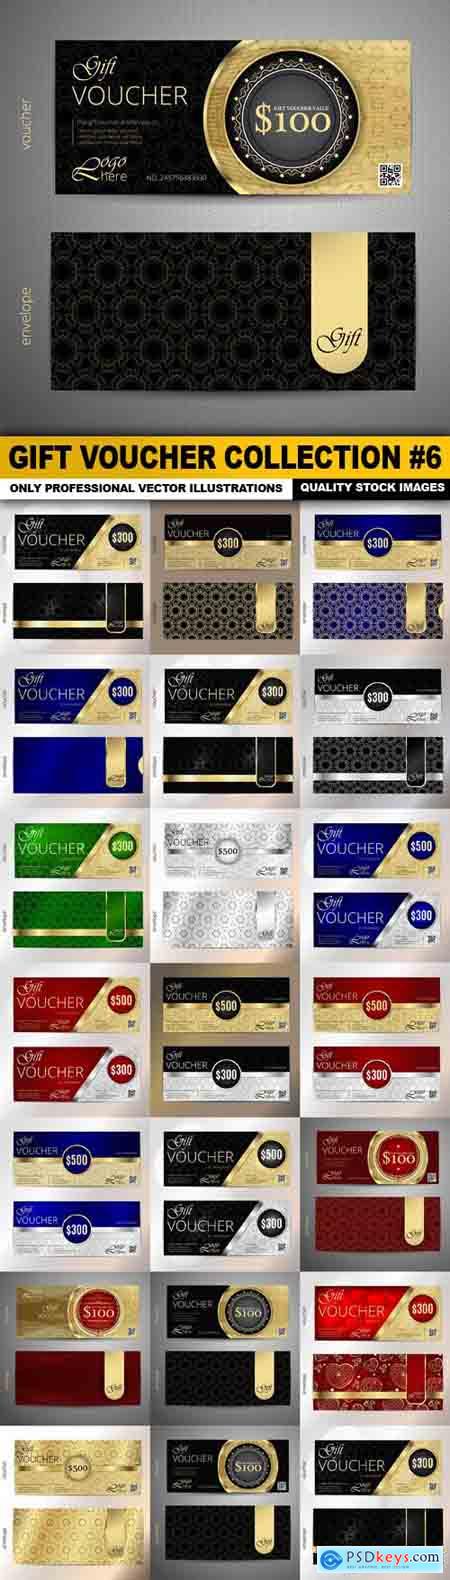 Gift Voucher Collection #6 - 20 Vector